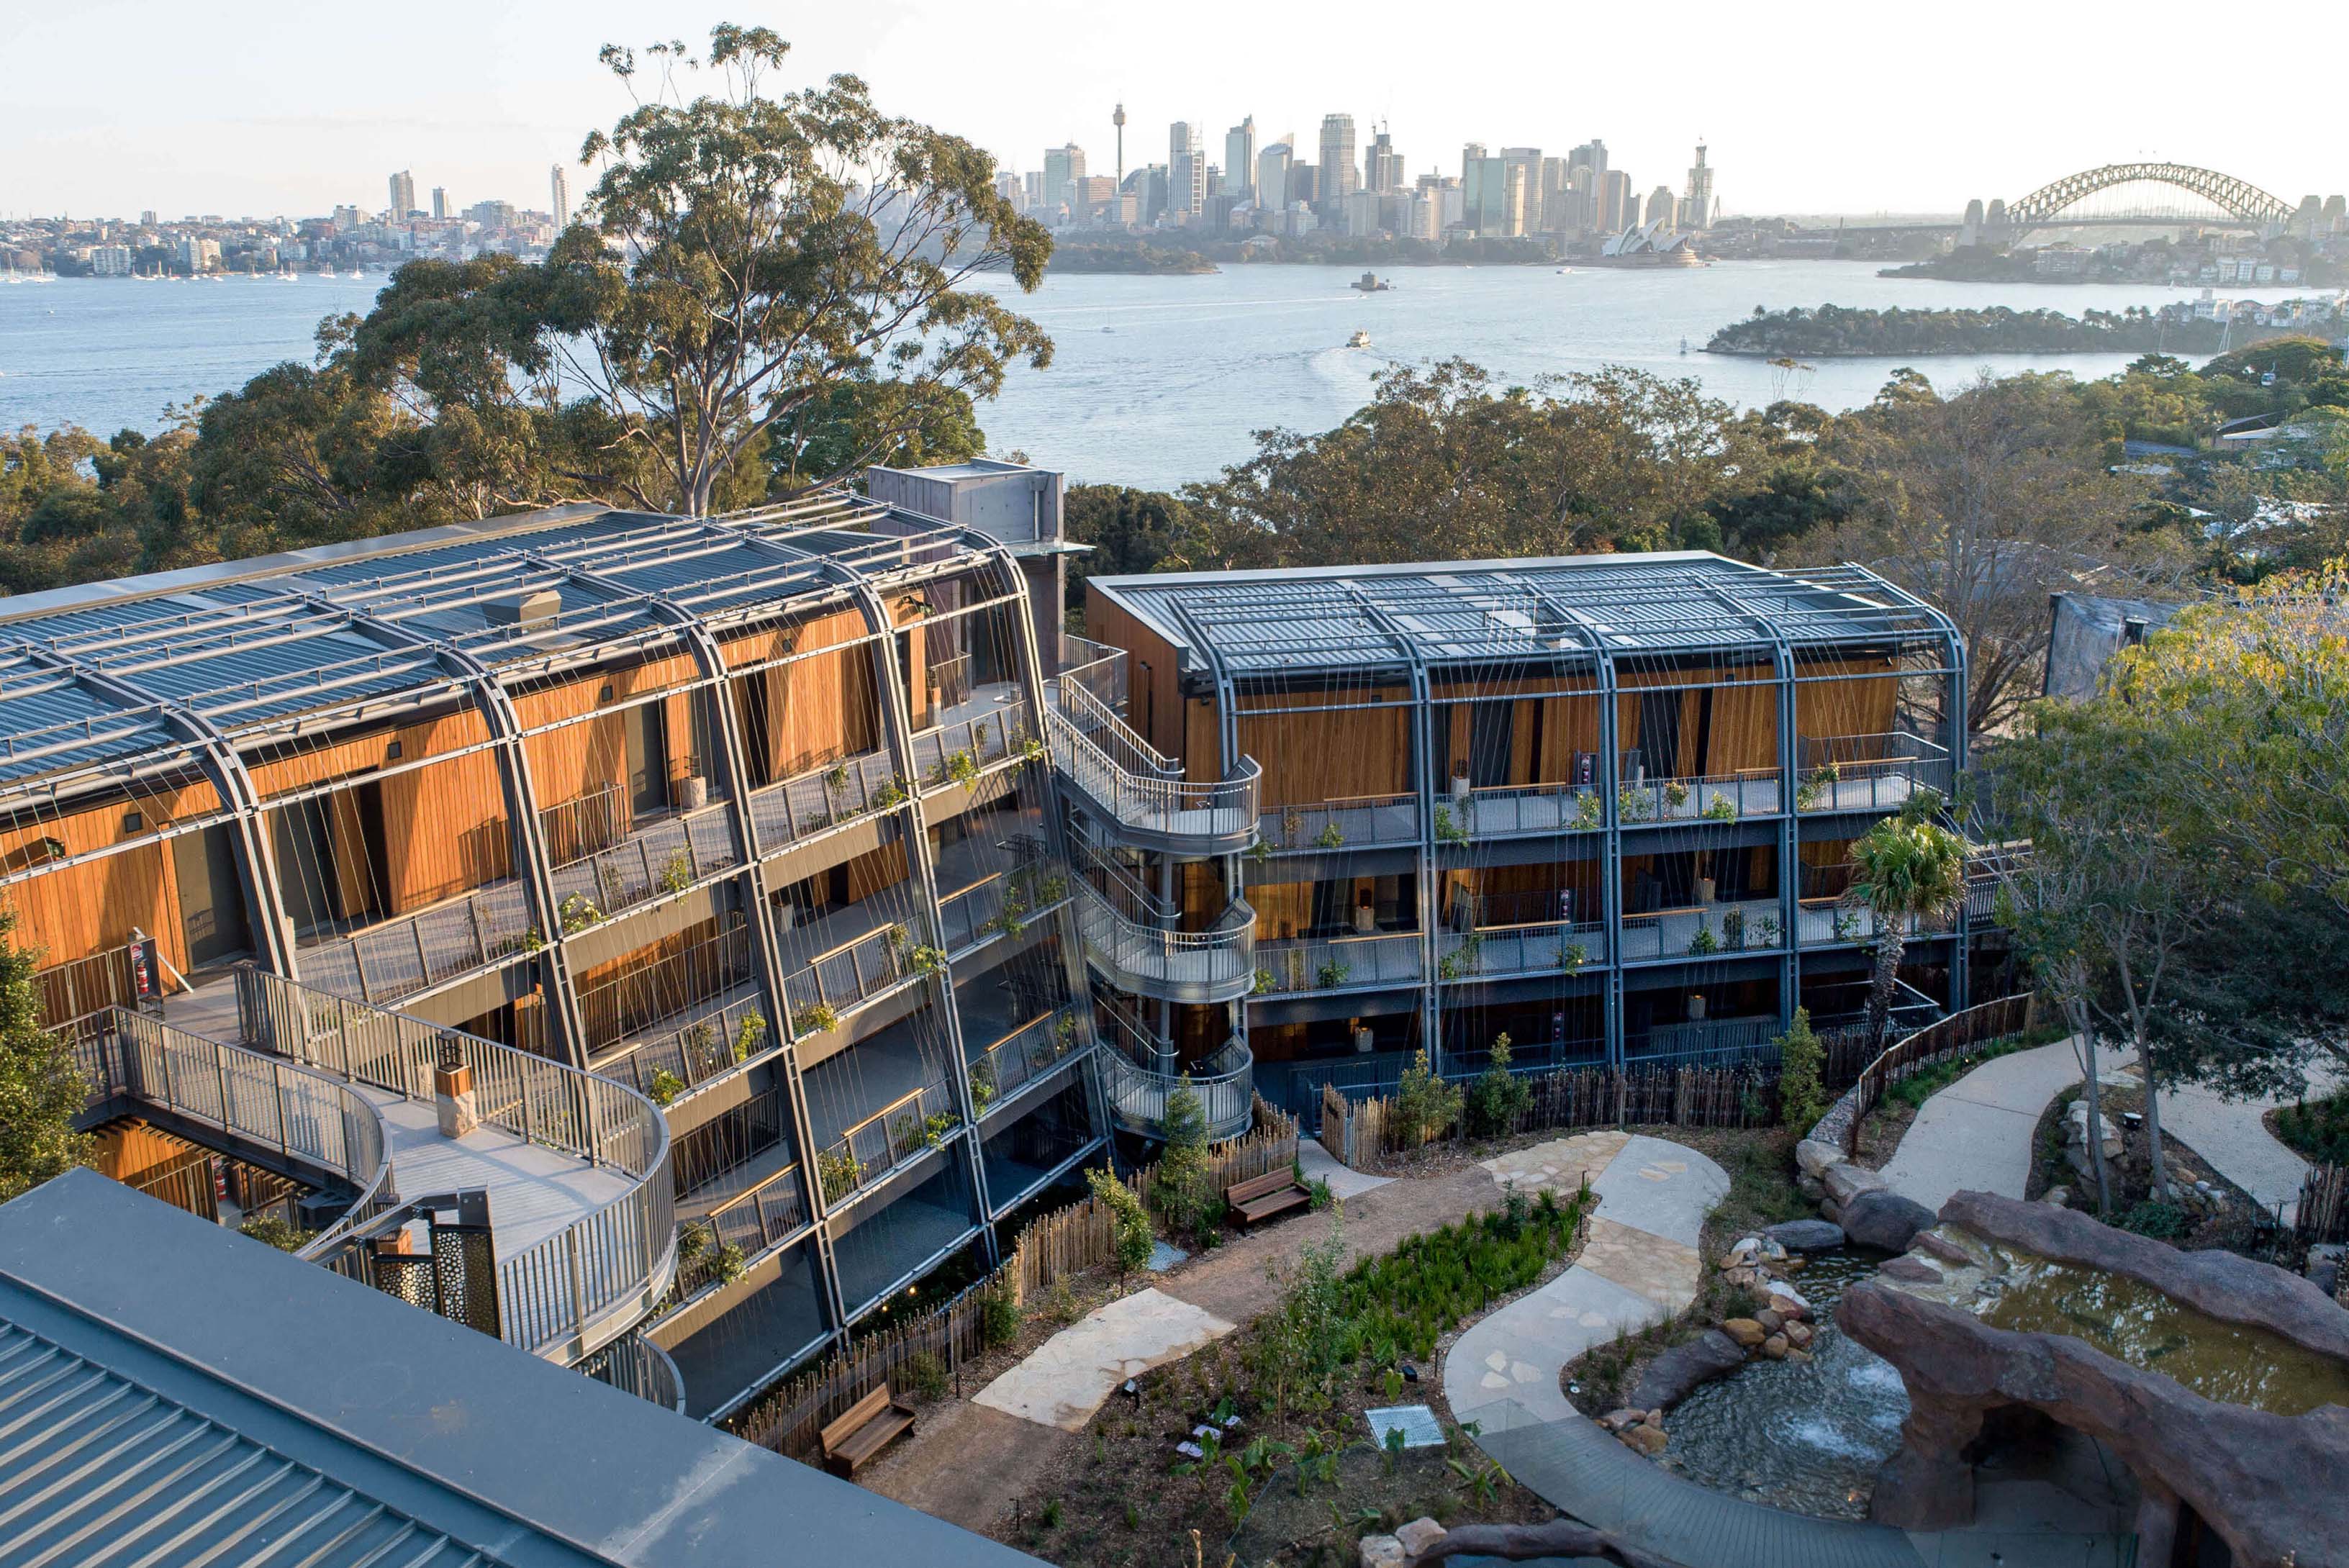 3 5 buildings containing 62 rooms connects via elevated walkways at taronga wildlife retreat sydney taylor construction hospitality